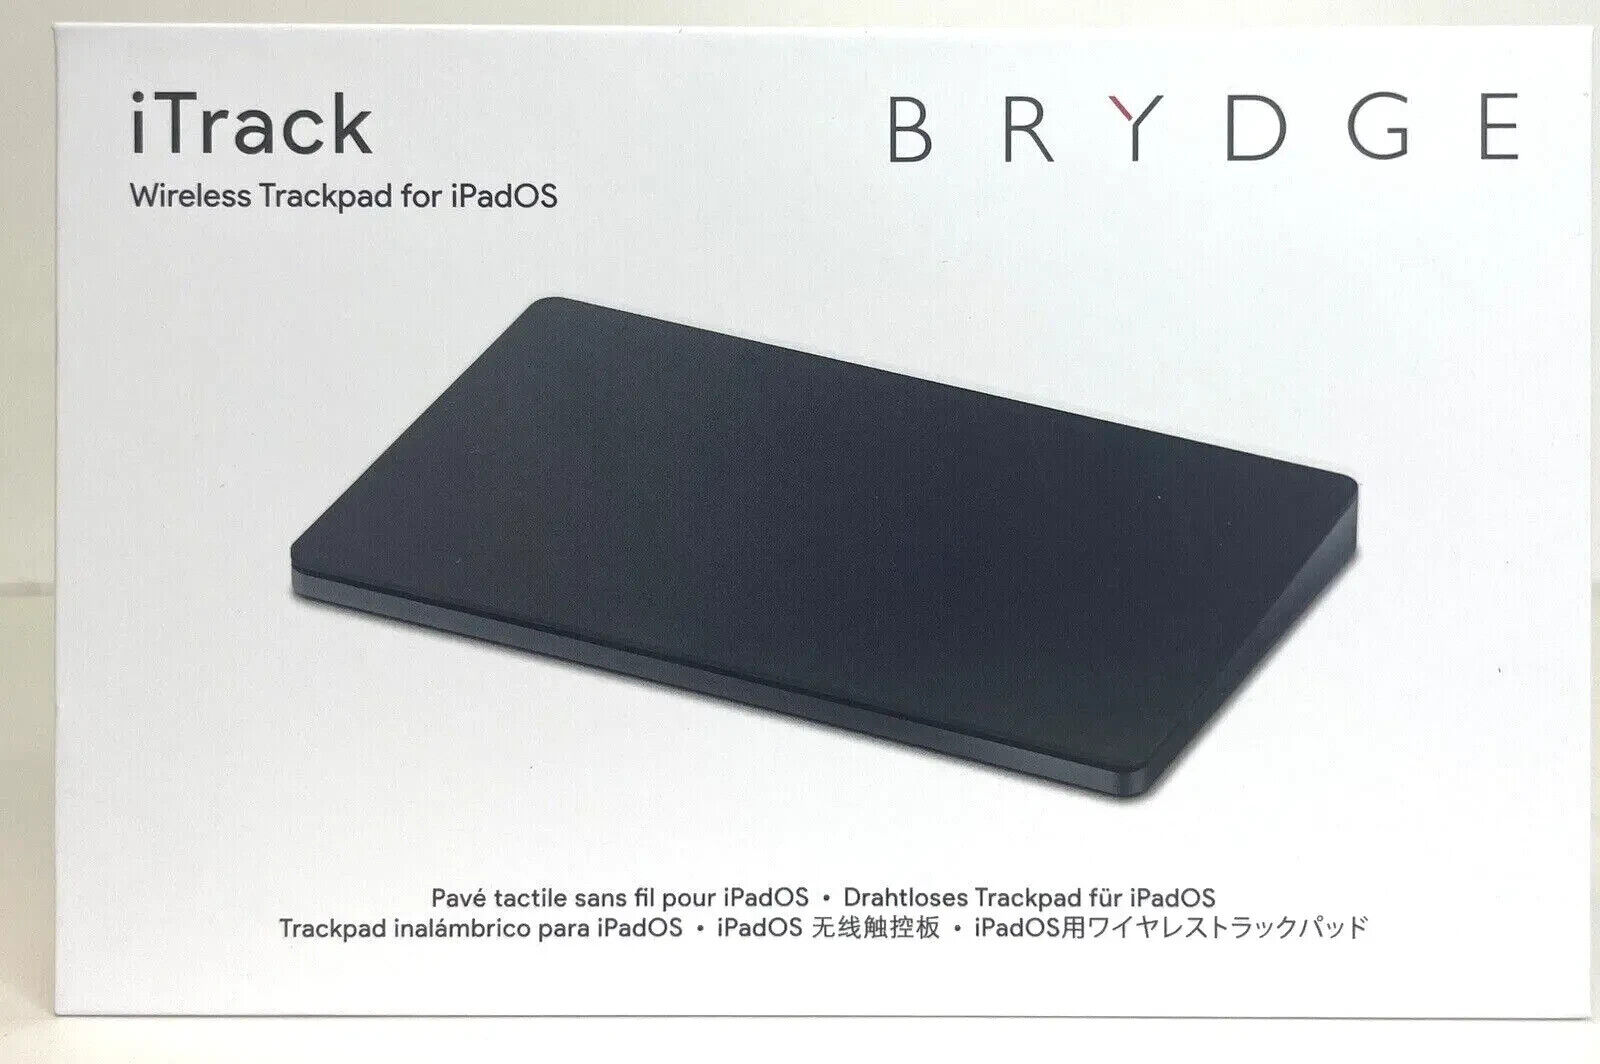 Brydge iTrack Wireless Trackpad for Windows Macbooks Rechargeable multi surface